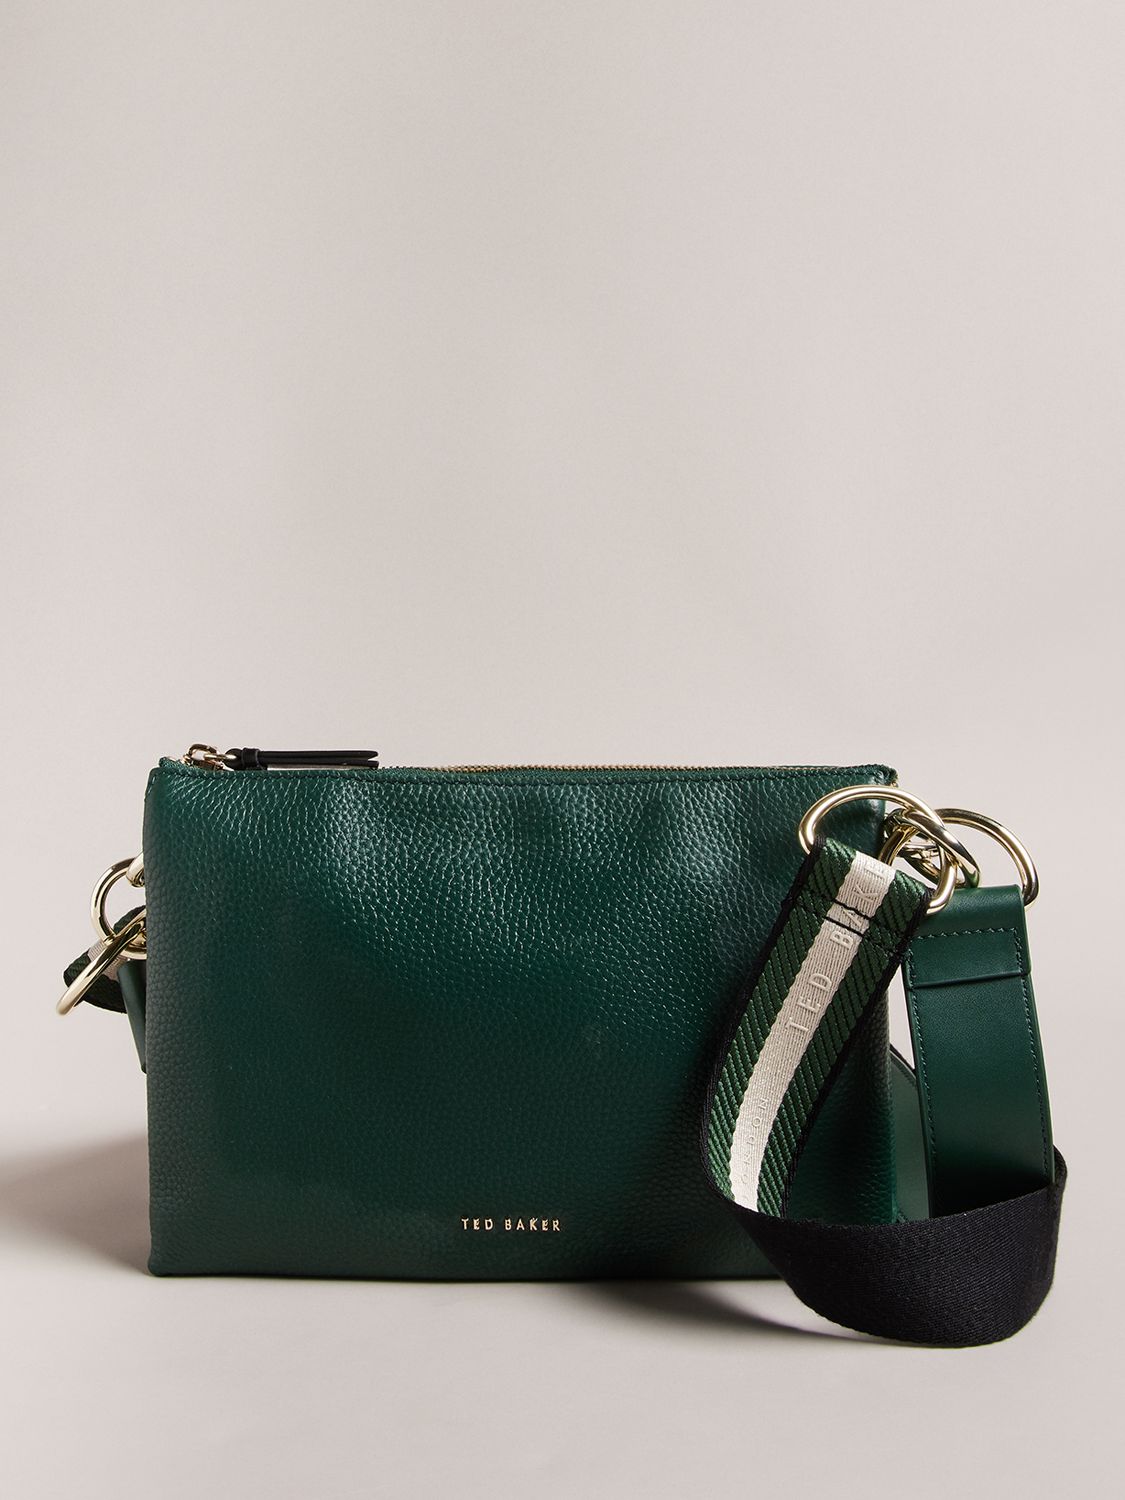 Ted Baker Parcey Floral Leather Crossbody Bag in Green